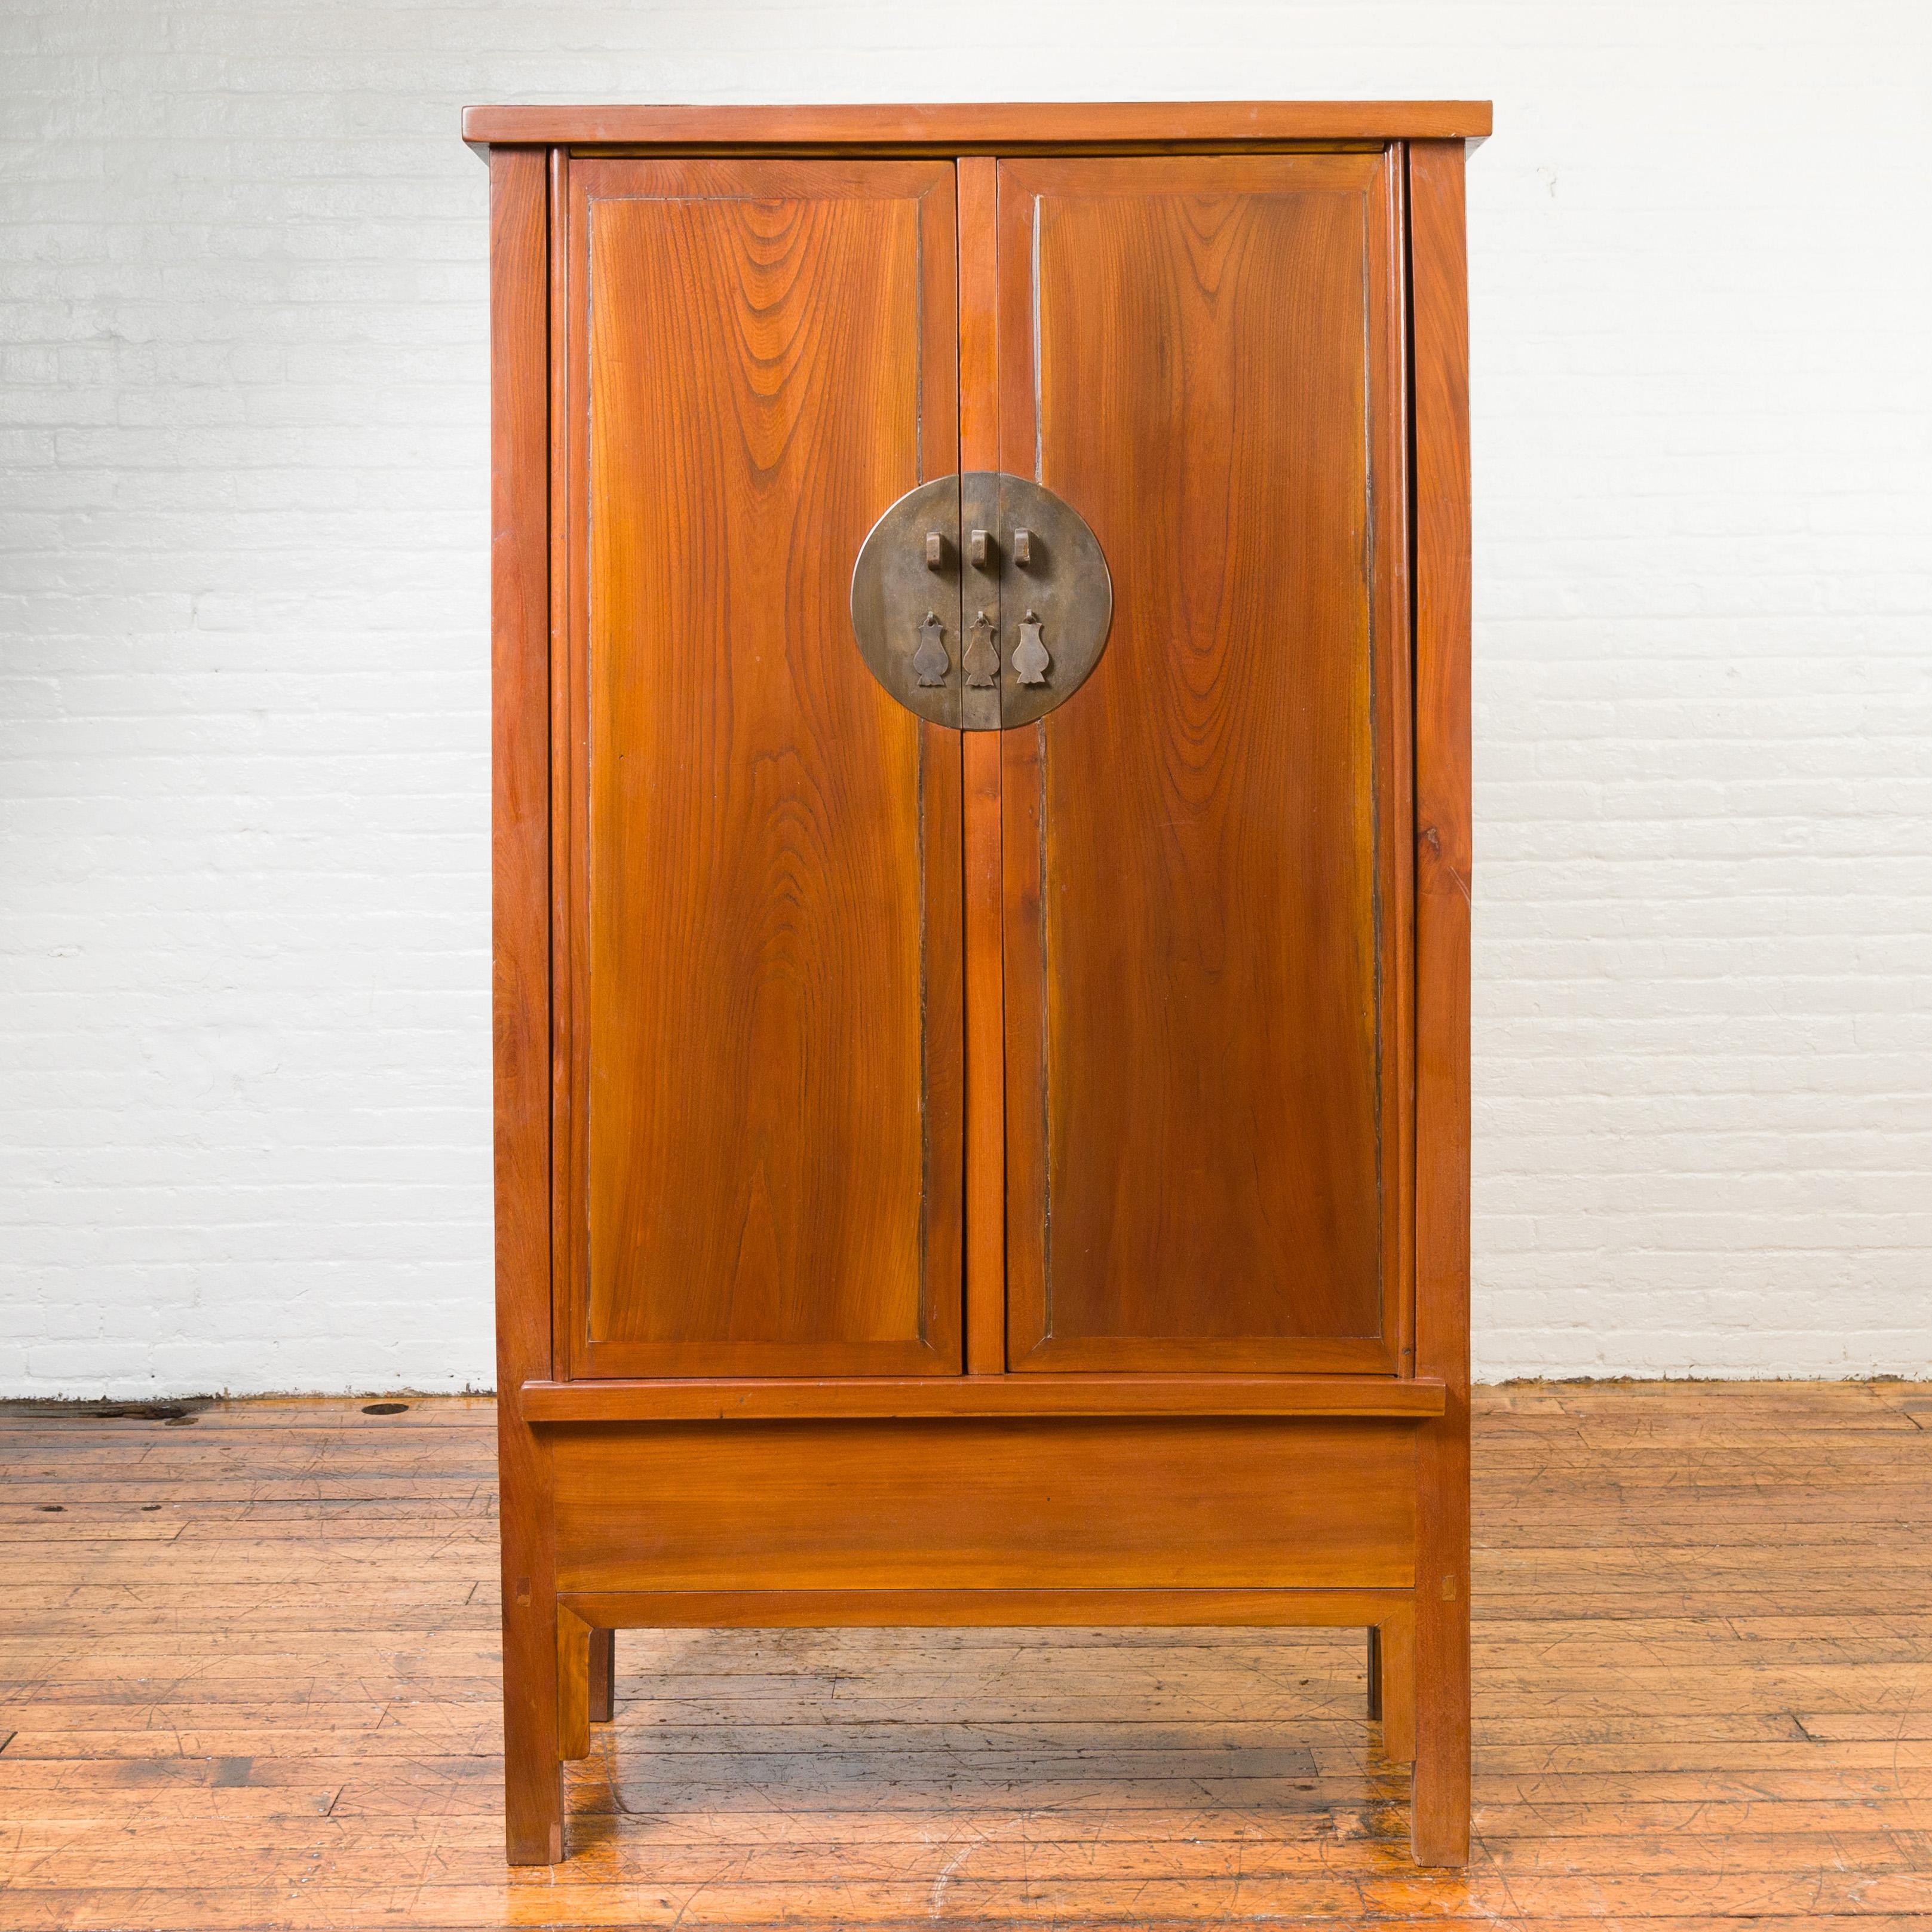 A Chinese Qing Dynasty elmwood cabinet from the 19th century, with bronze medallion hardware and inner drawers. Crafted in China during the Qing Dynasty, this elm cabinet features two large doors marked in their center with a large bronze medallion